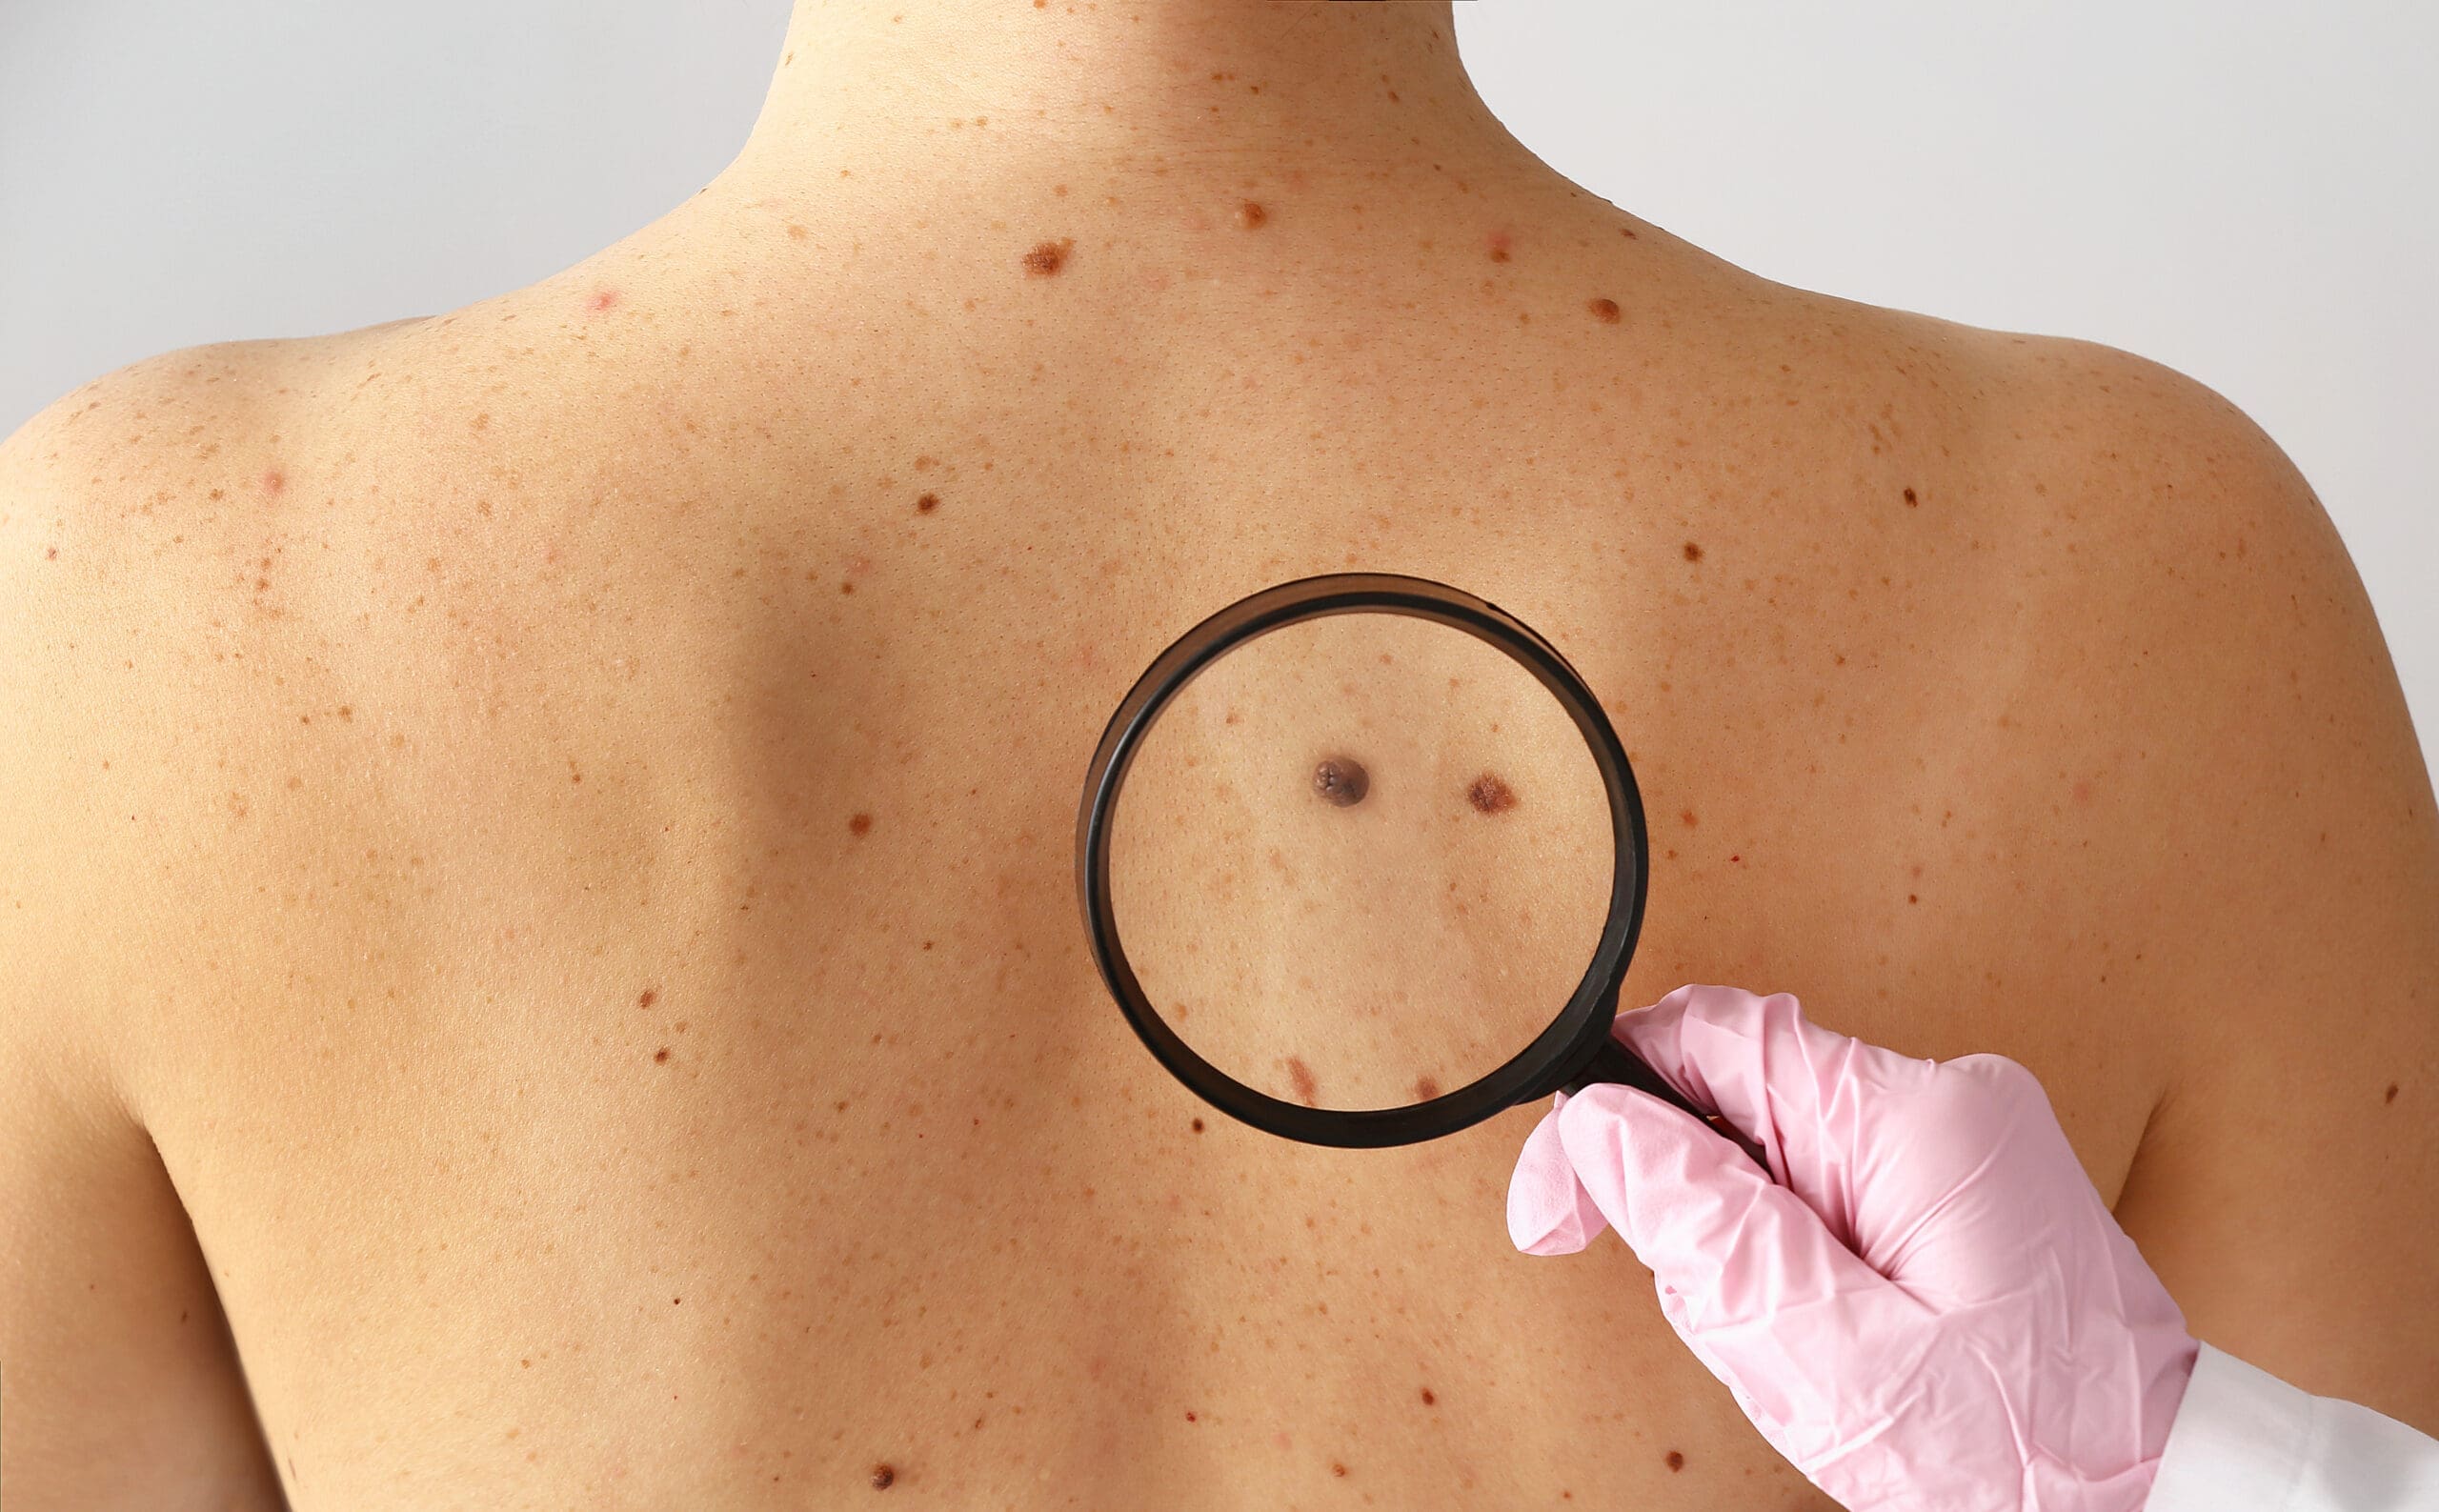 Melanoma Cases and Deaths Predicted to Rise in the Next Two Decades